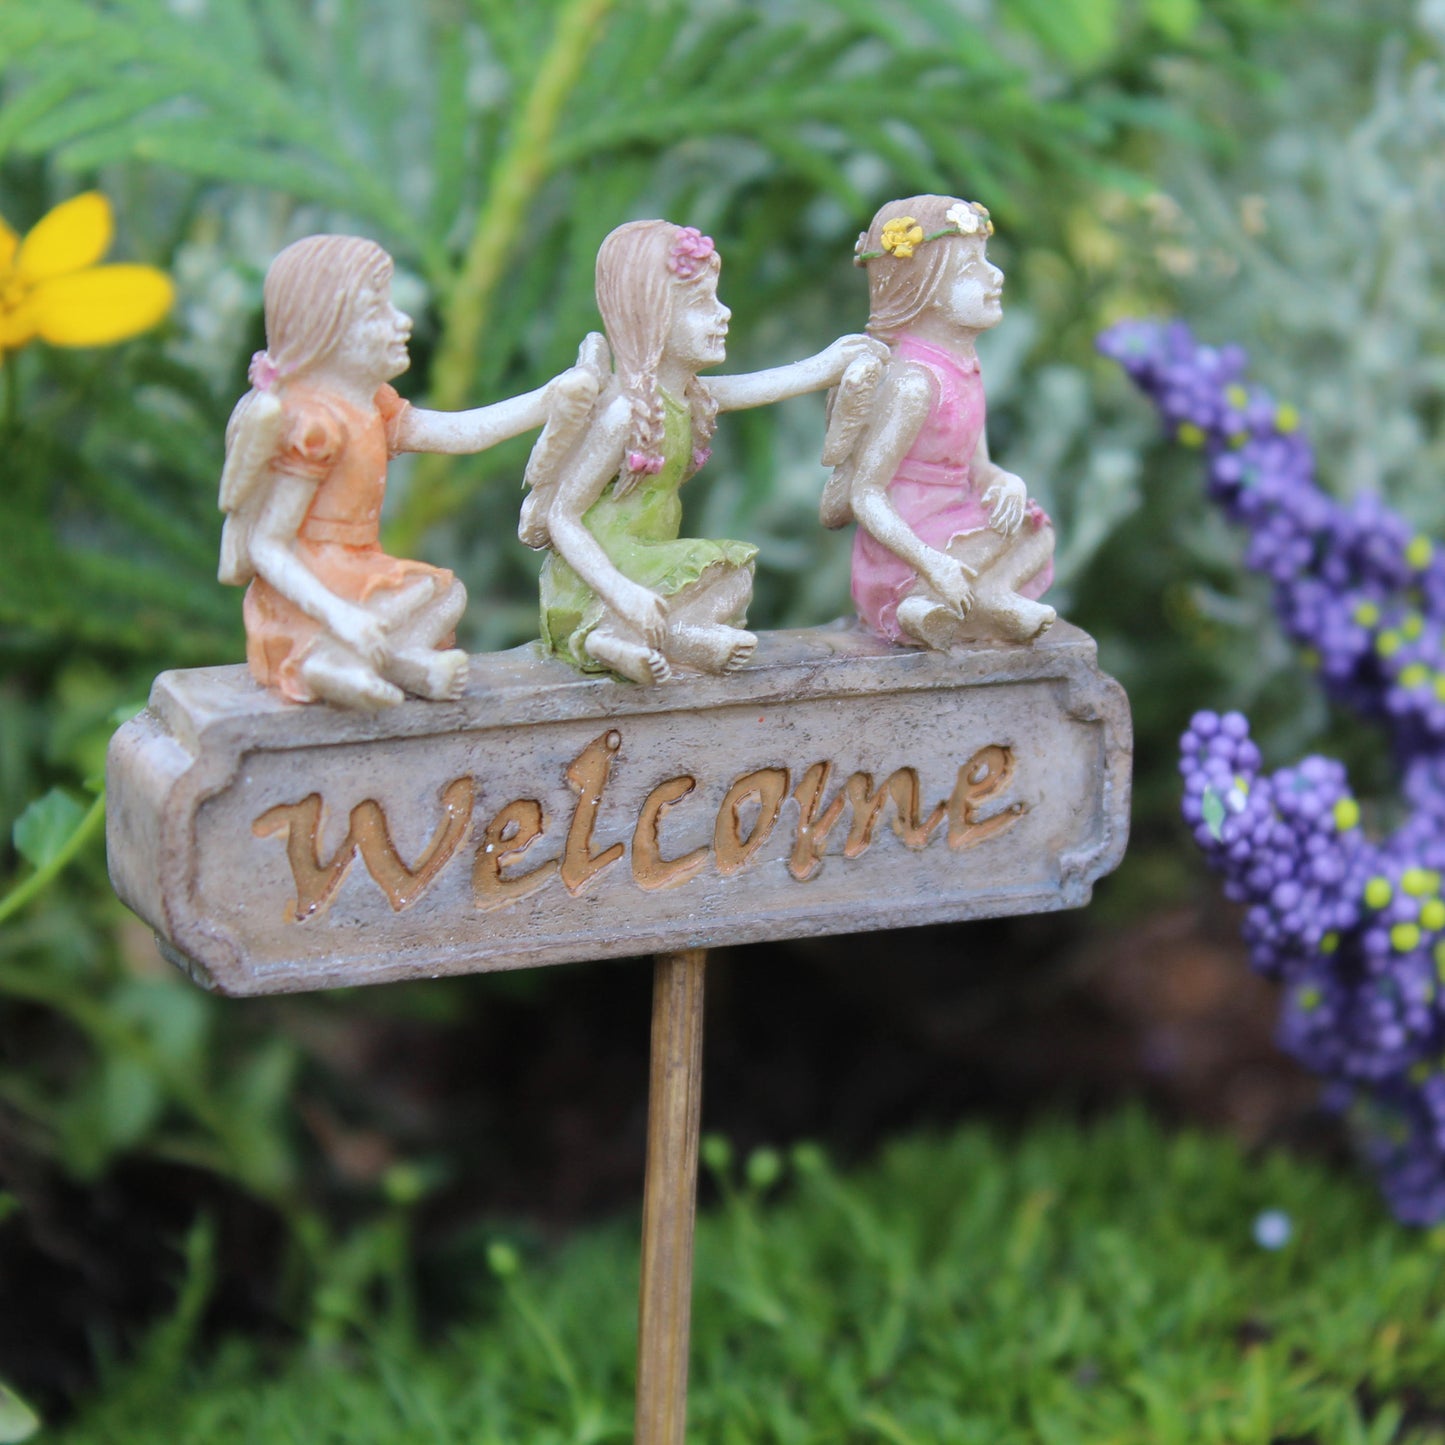 Three tiny fairies sitting upon a sign welcome you and your friends to your garden.